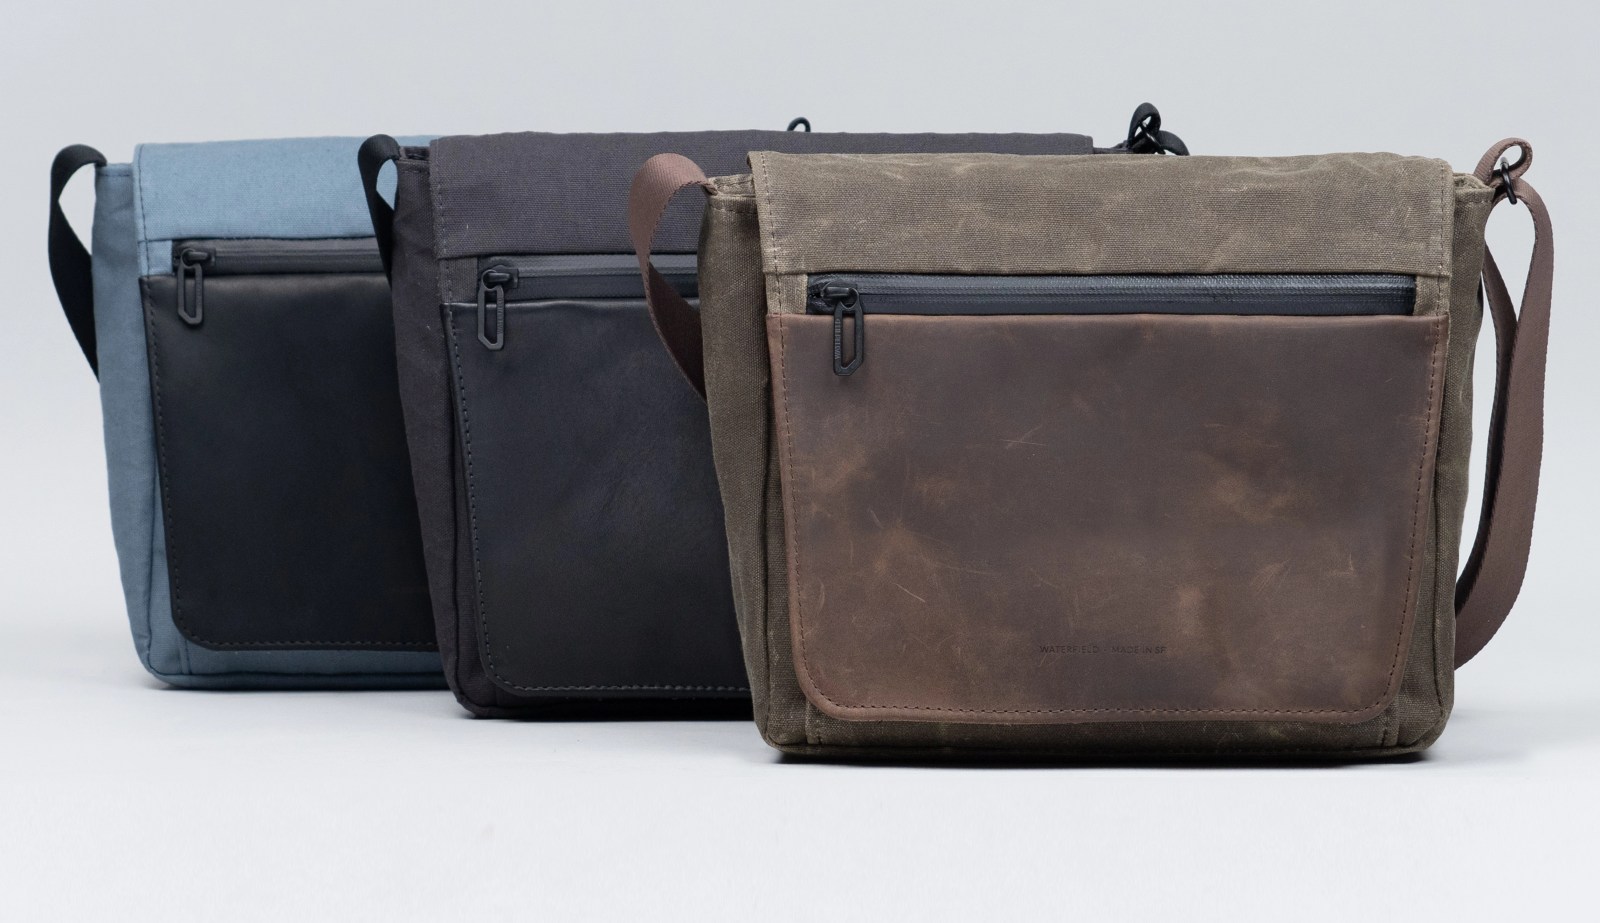 WaterField Shinjuku is a slim messenger bag for traveling with your new ...